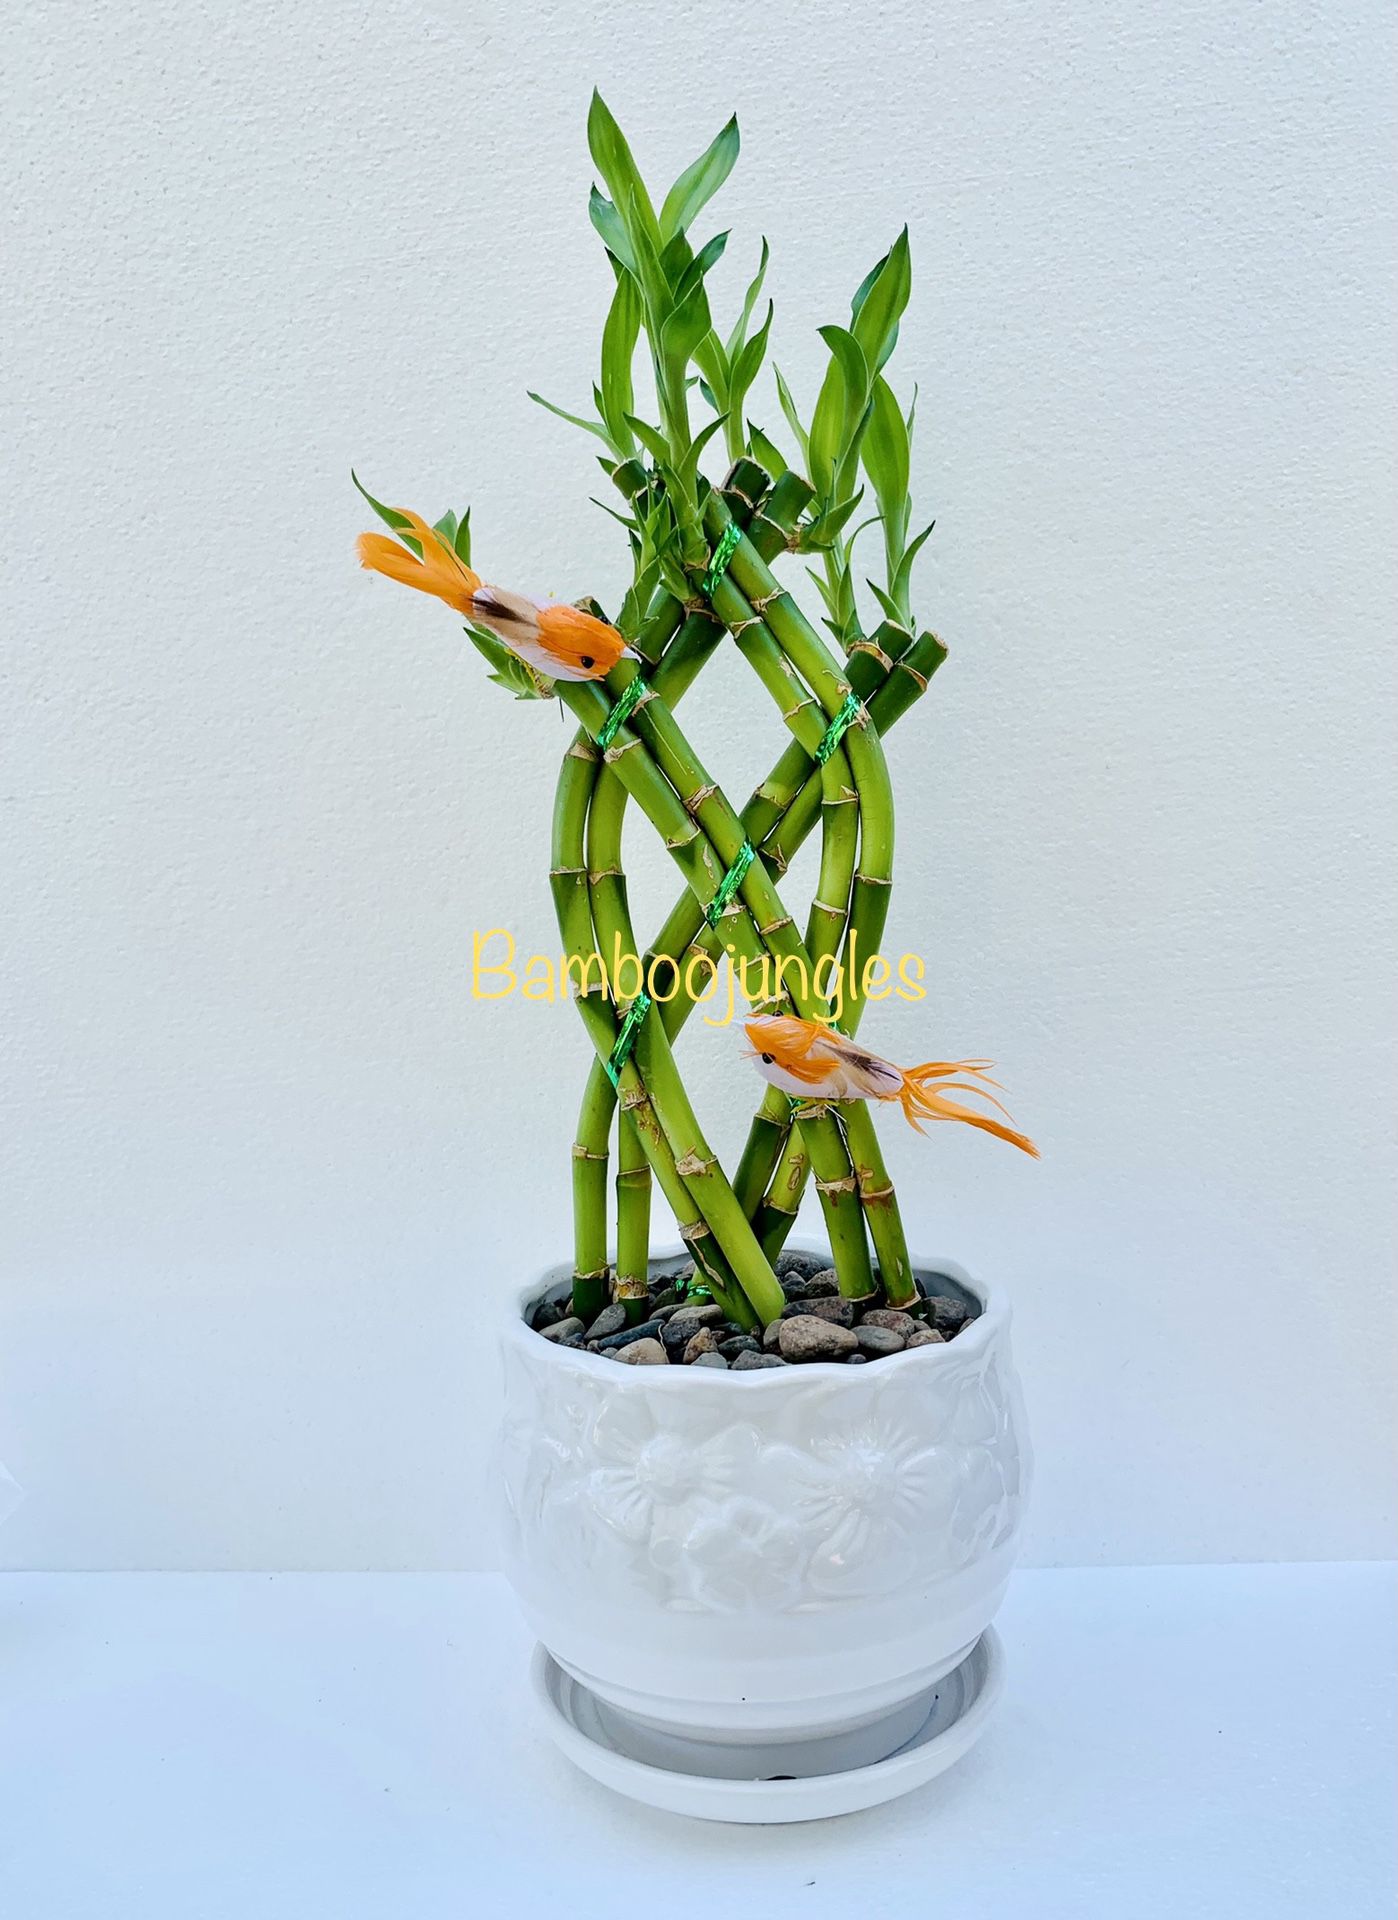 SHIPPING AVAILABLE Trellis Lucky Bamboo Live Plant Ceramic Pot Assorted Color Bird 14" Tall $12/each